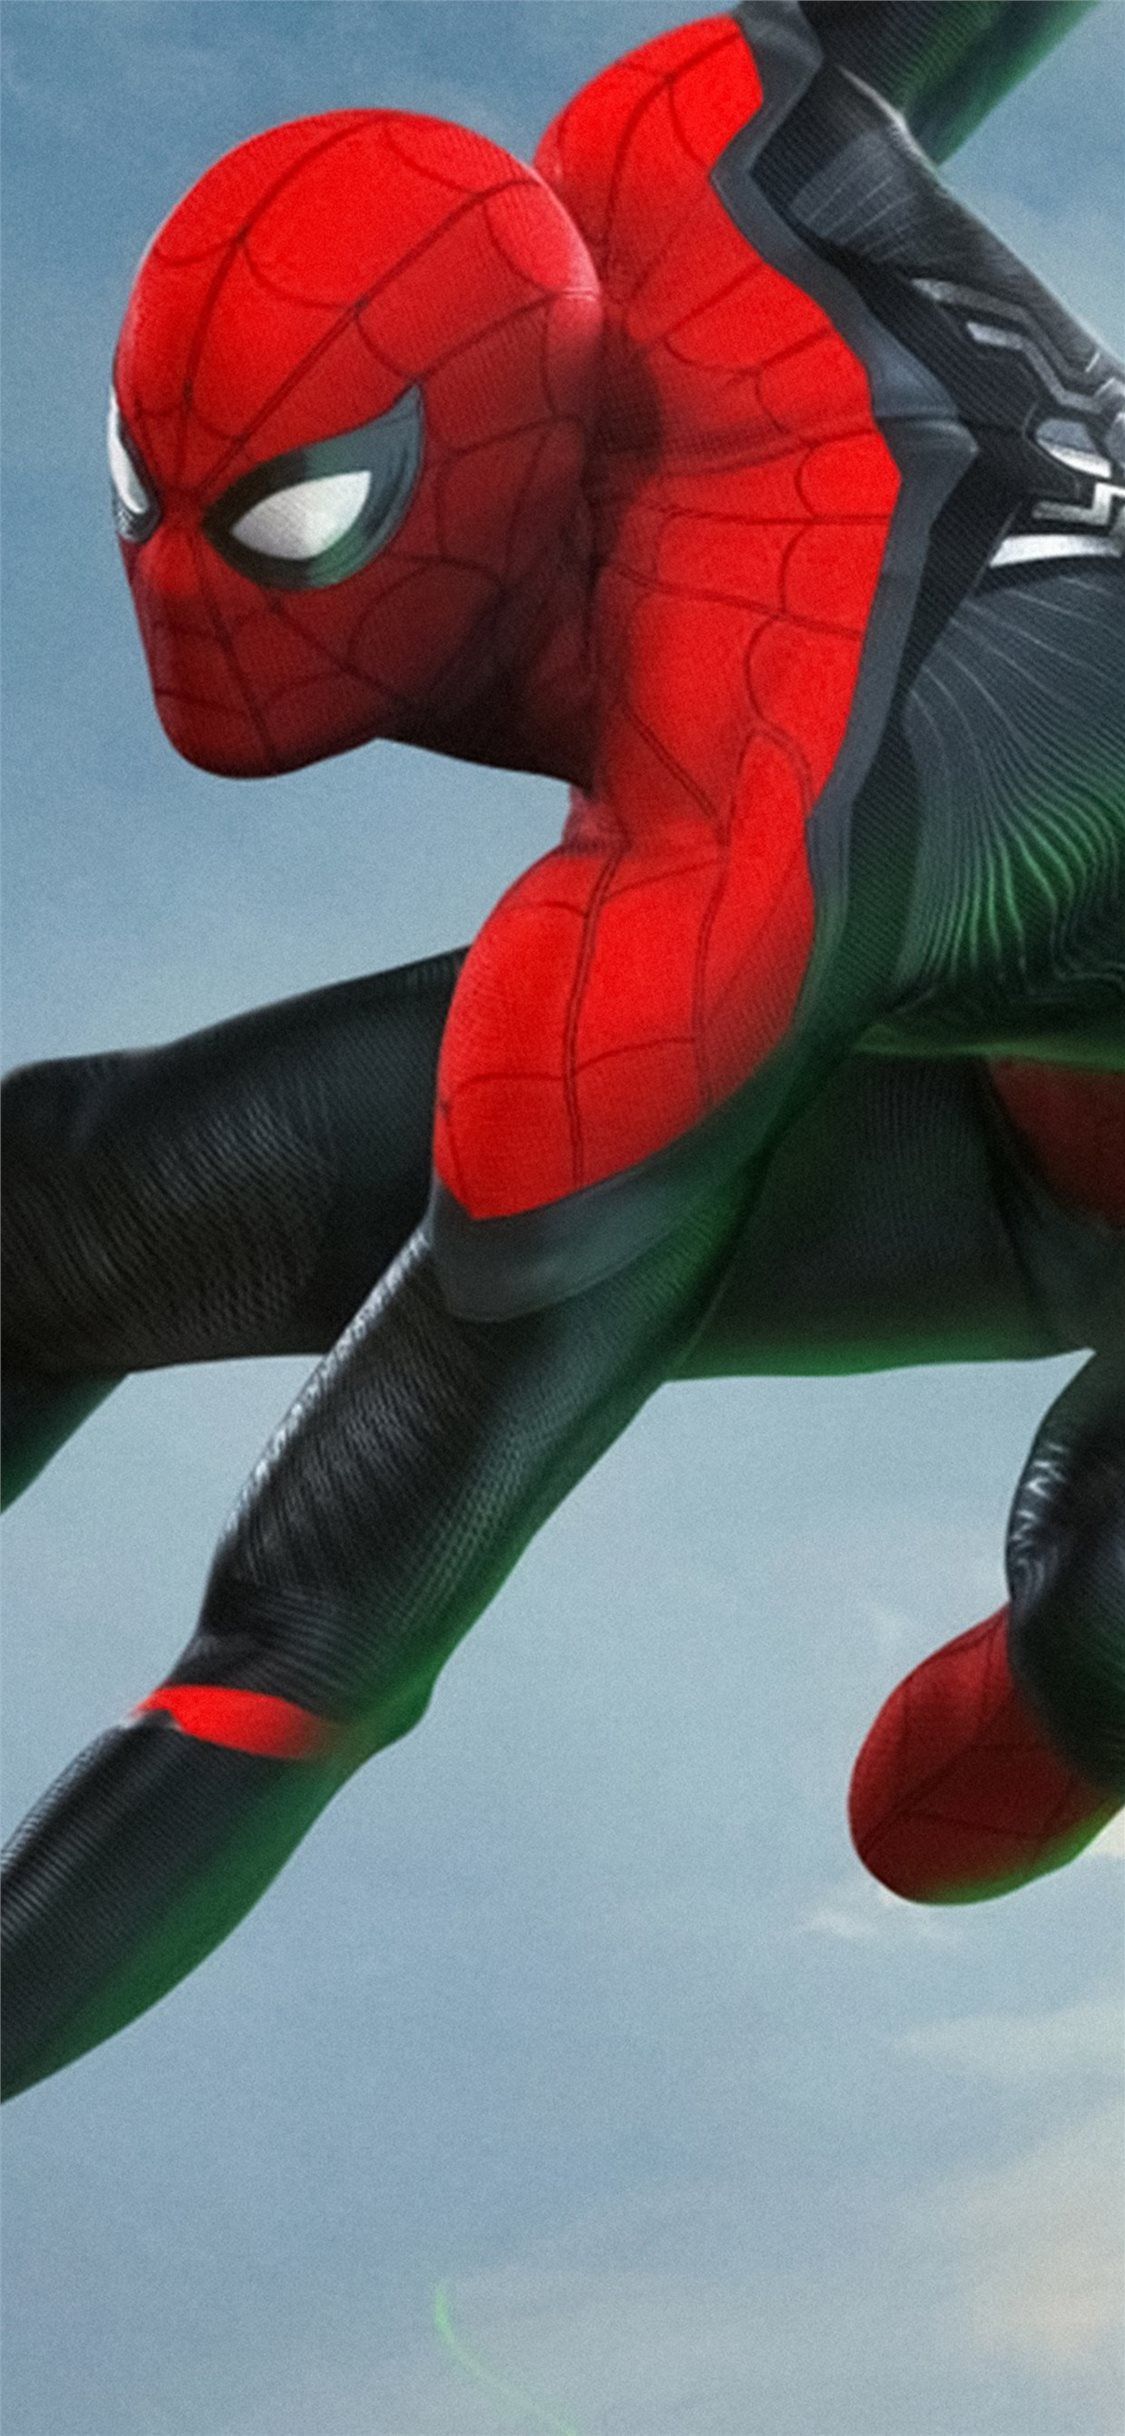 spiderman far fromhome movie iPhone Wallpapers Free Download